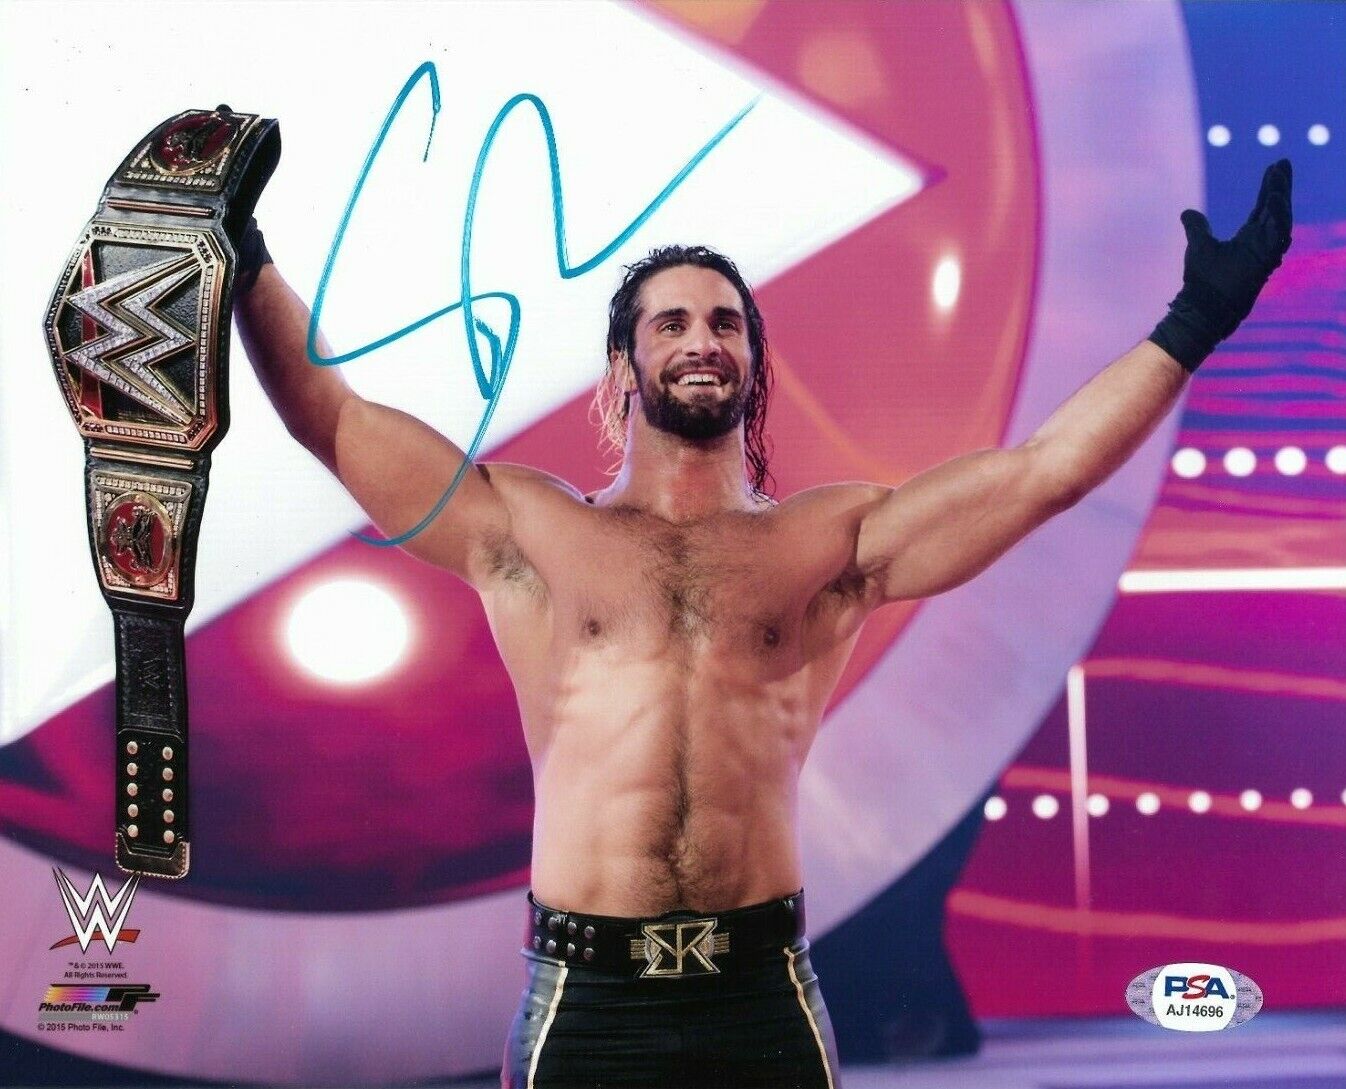 WWE SETH ROLLINS HAND SIGNED AUTOGRAPHED 8X10 Photo Poster painting WITH PROOF AND PSA COA 20